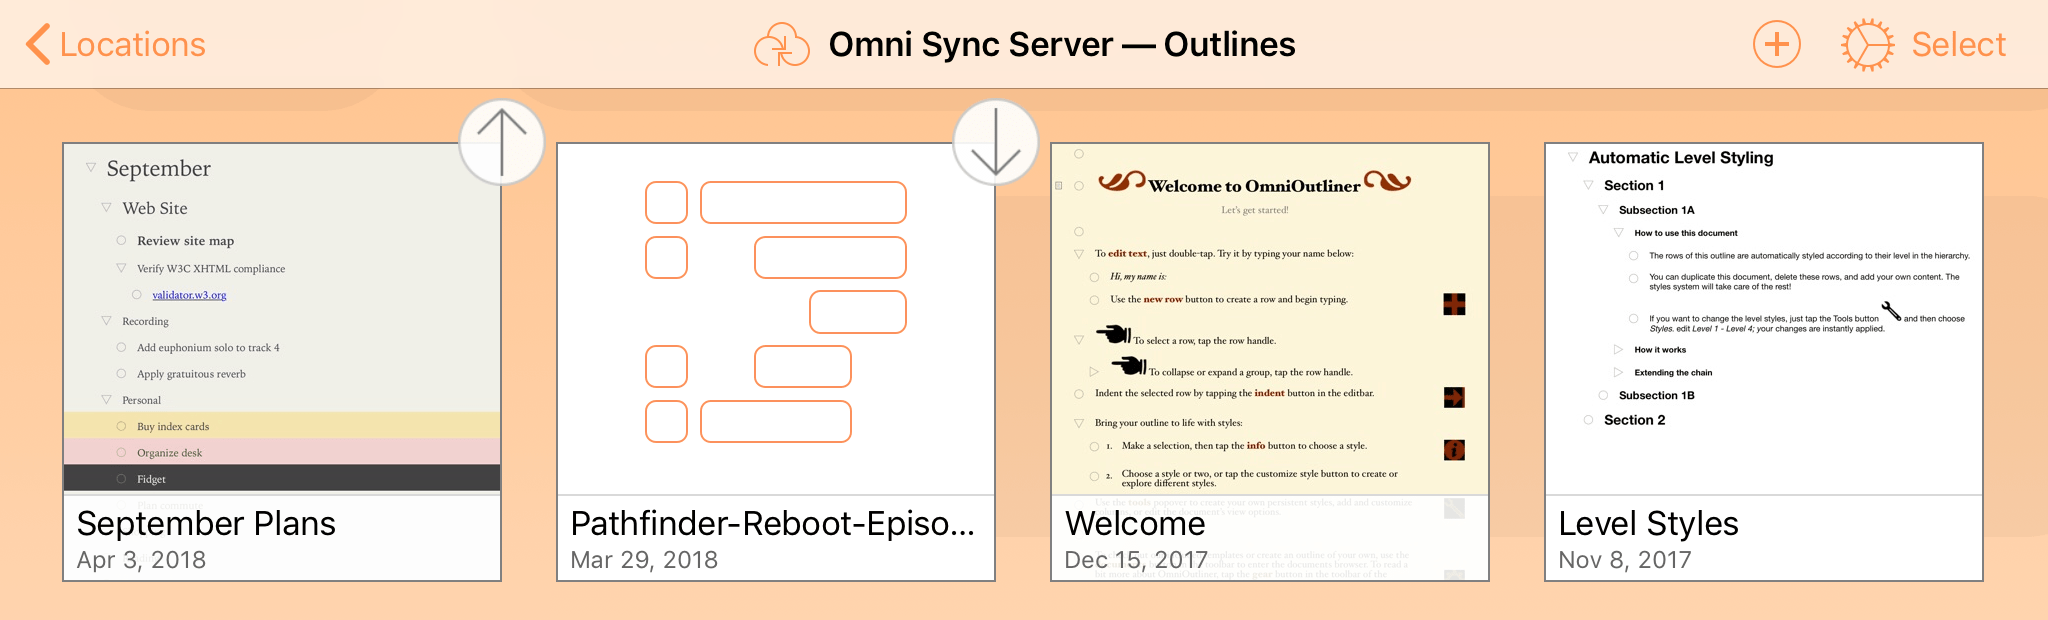 A synced OmniPresence folder with up and down arrow icons attached to some of the document thumbnails, indicating that a sync is in process for those files.